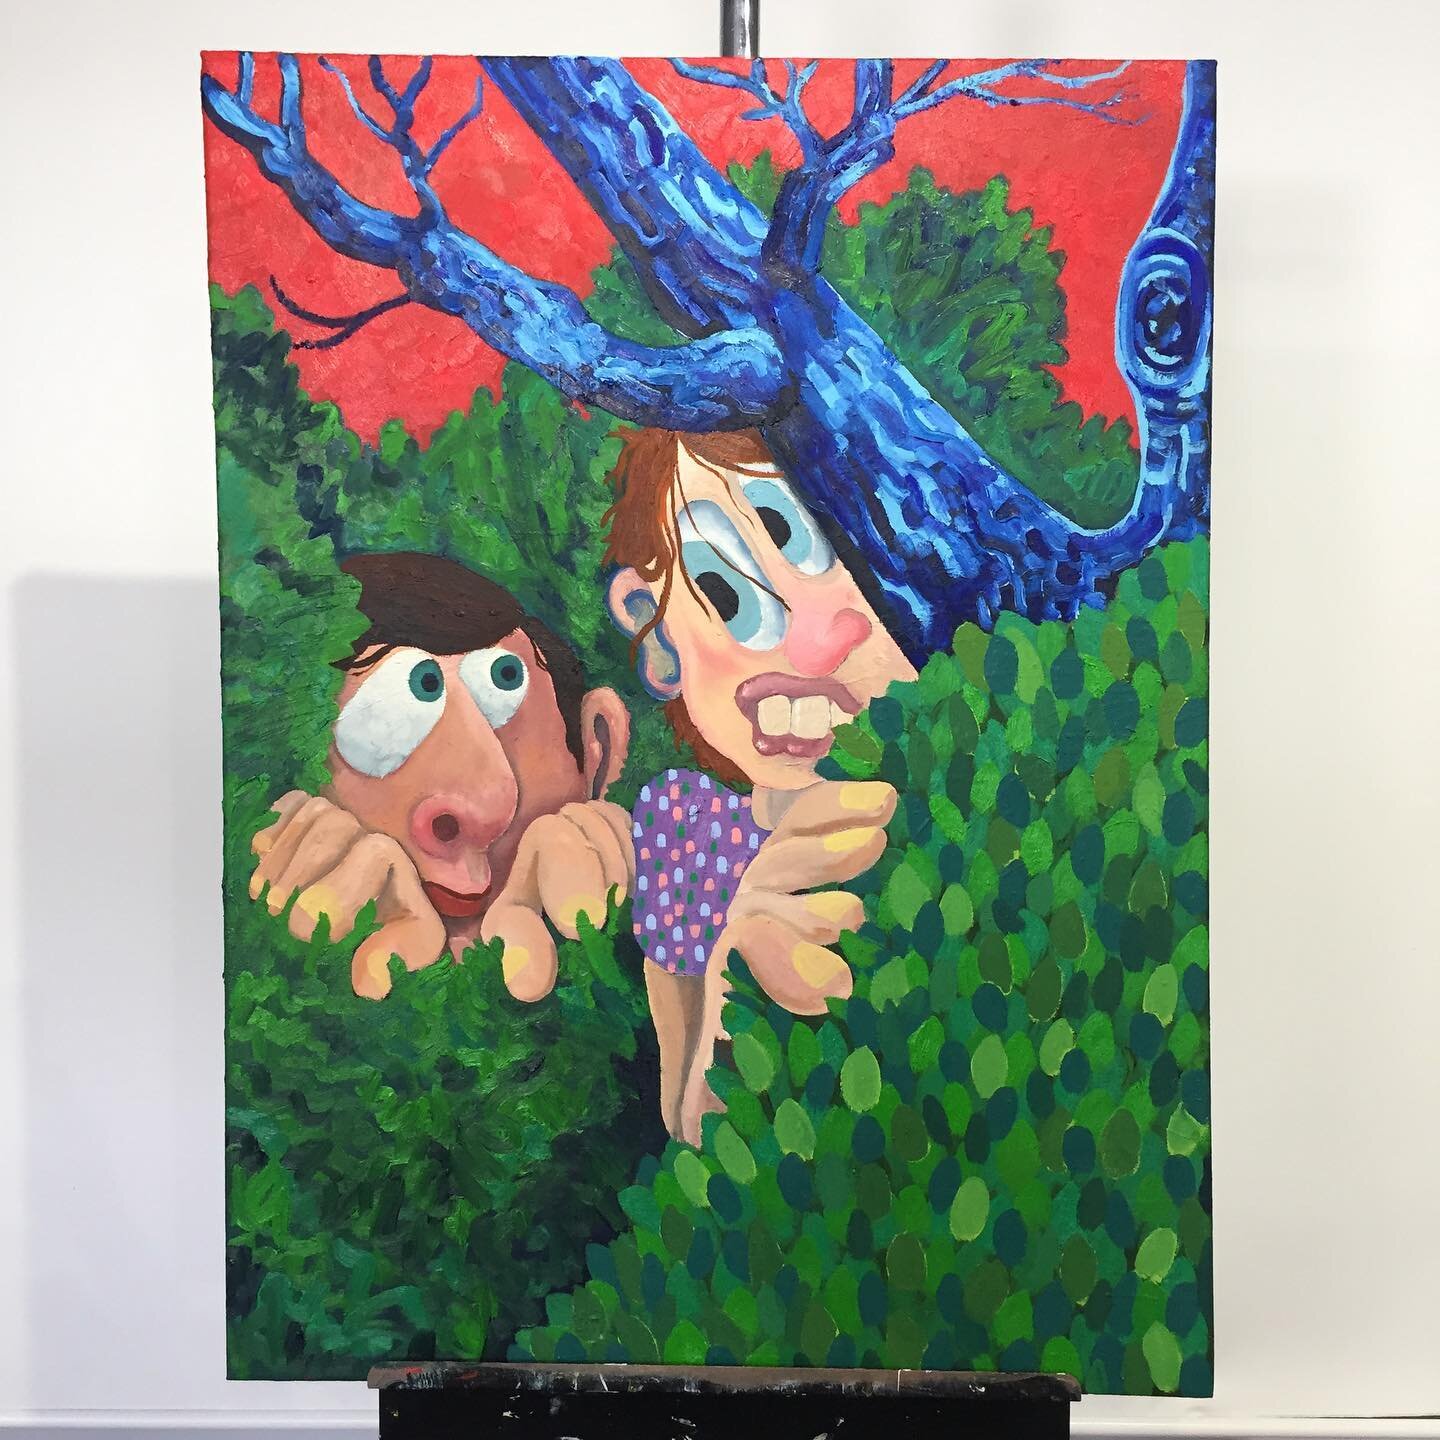 Just a couple of peeping toms 👀

This was an old painting I started before going to grad school. The scene and figures were different but much the same. I still don&rsquo;t like this painting but oh well, enjoy 🤷&zwj;♂️

Peeping Toms
Oil on canvas
